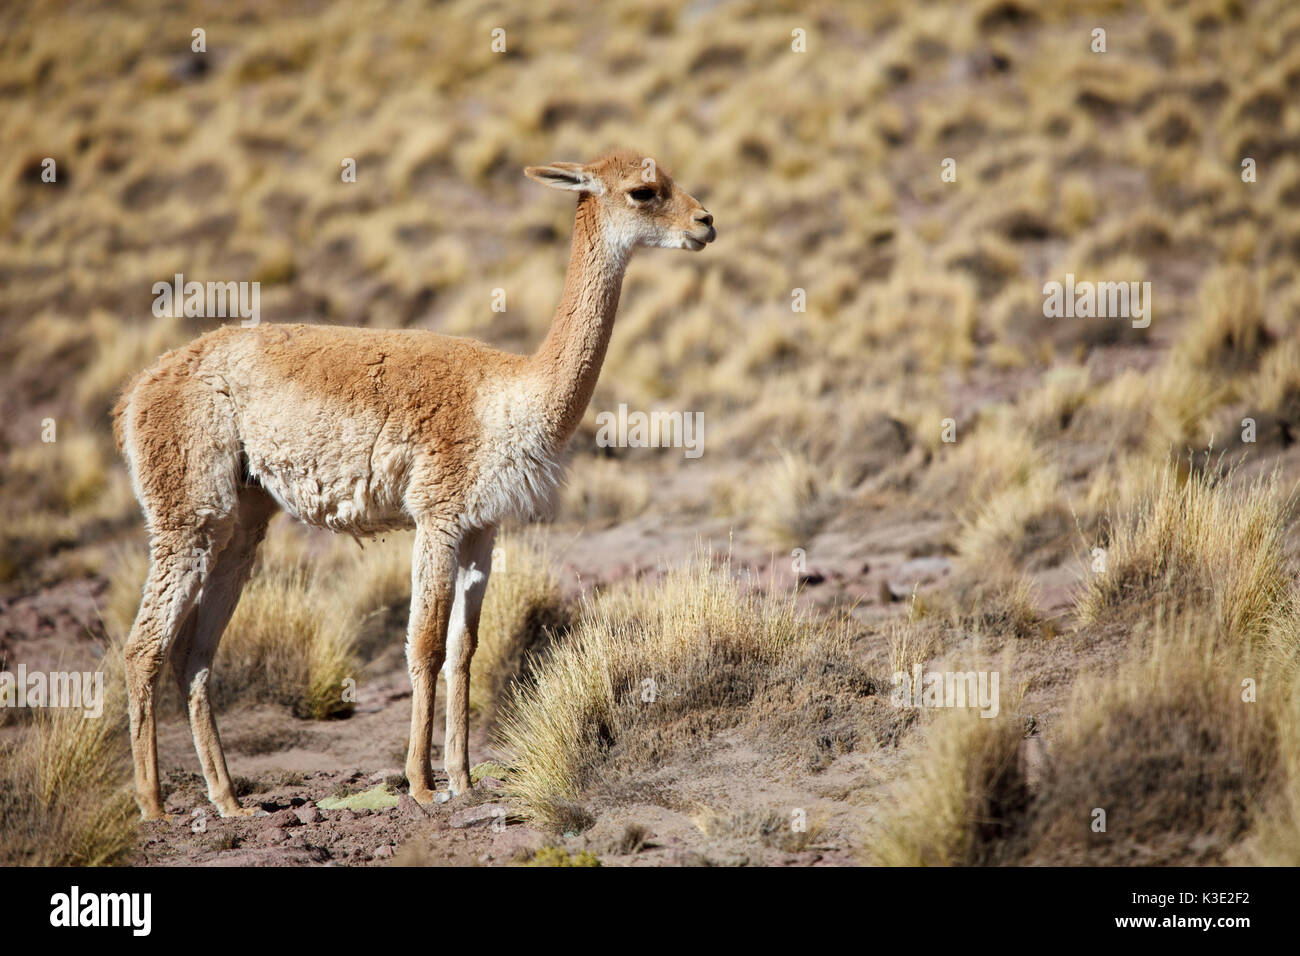 Chile, the North, Andines highland, Ichu grass, Vicuna, Stock Photo